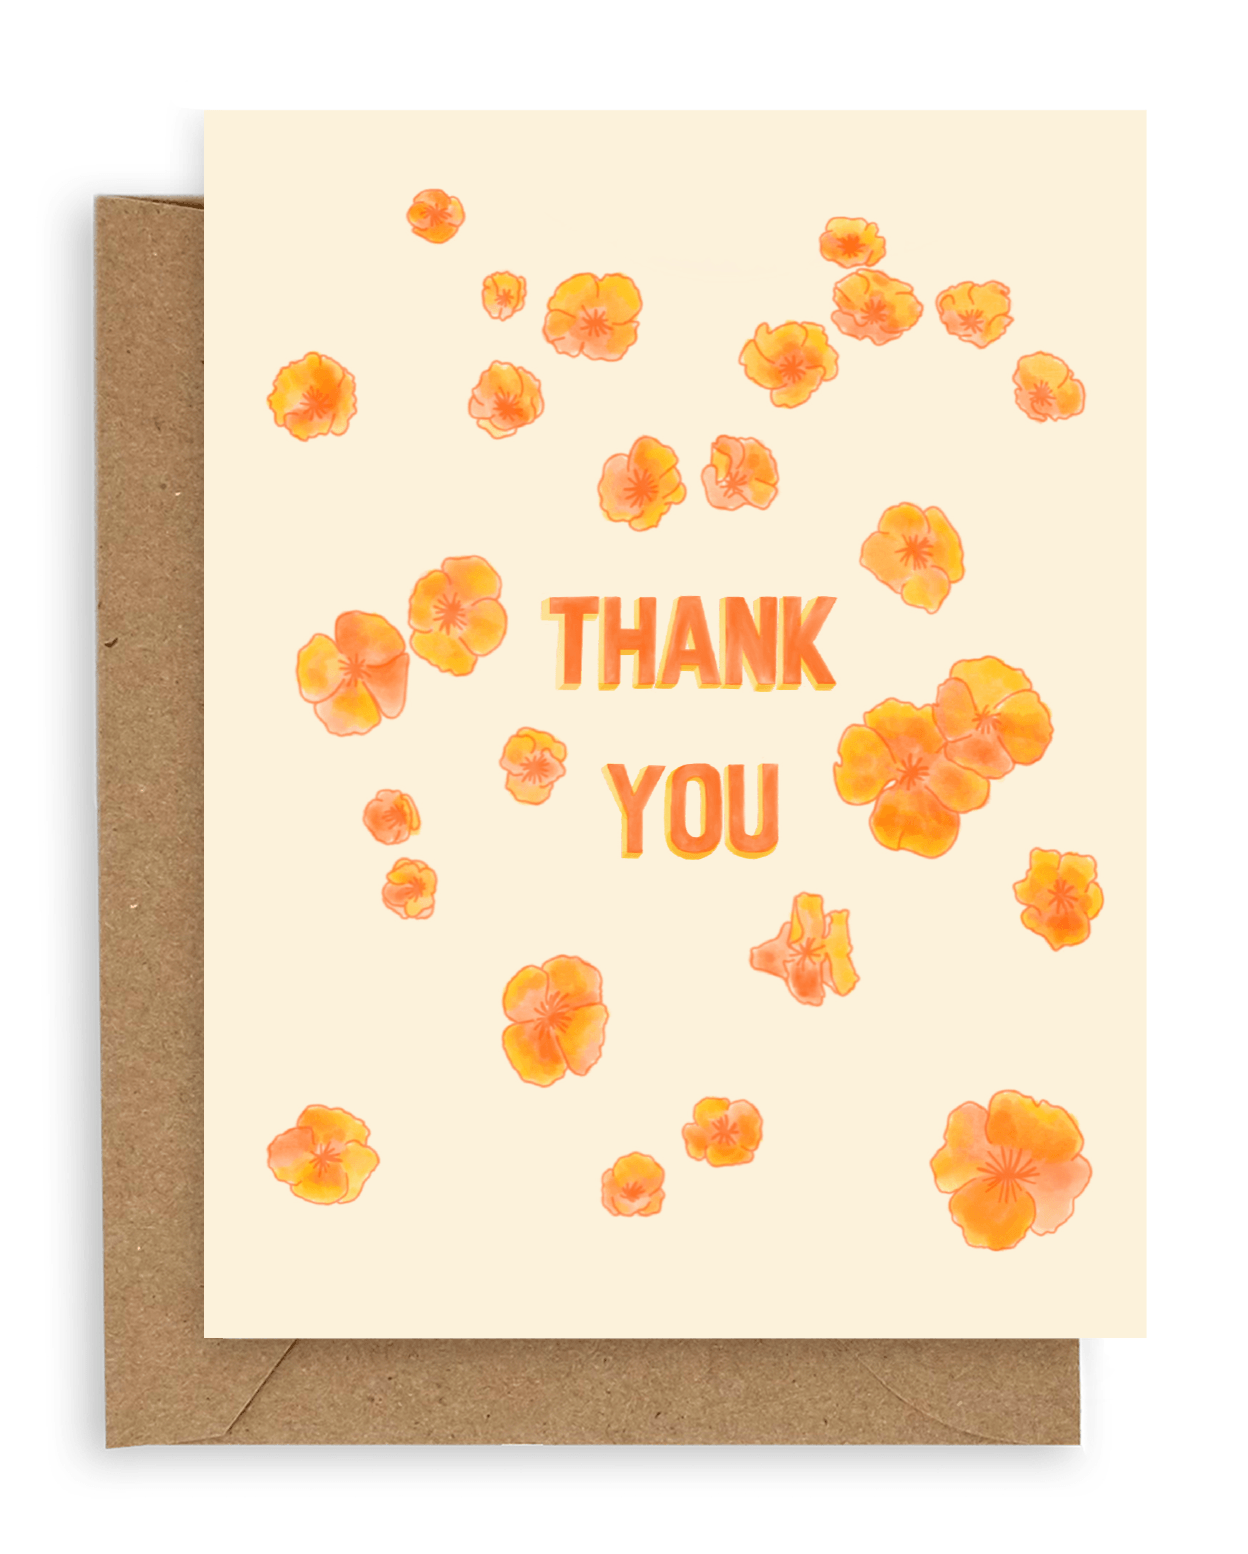 Orange California poppies surround the words &quot;thank you&quot; in orange font printed on a cream background. Shown with kraft envelope.